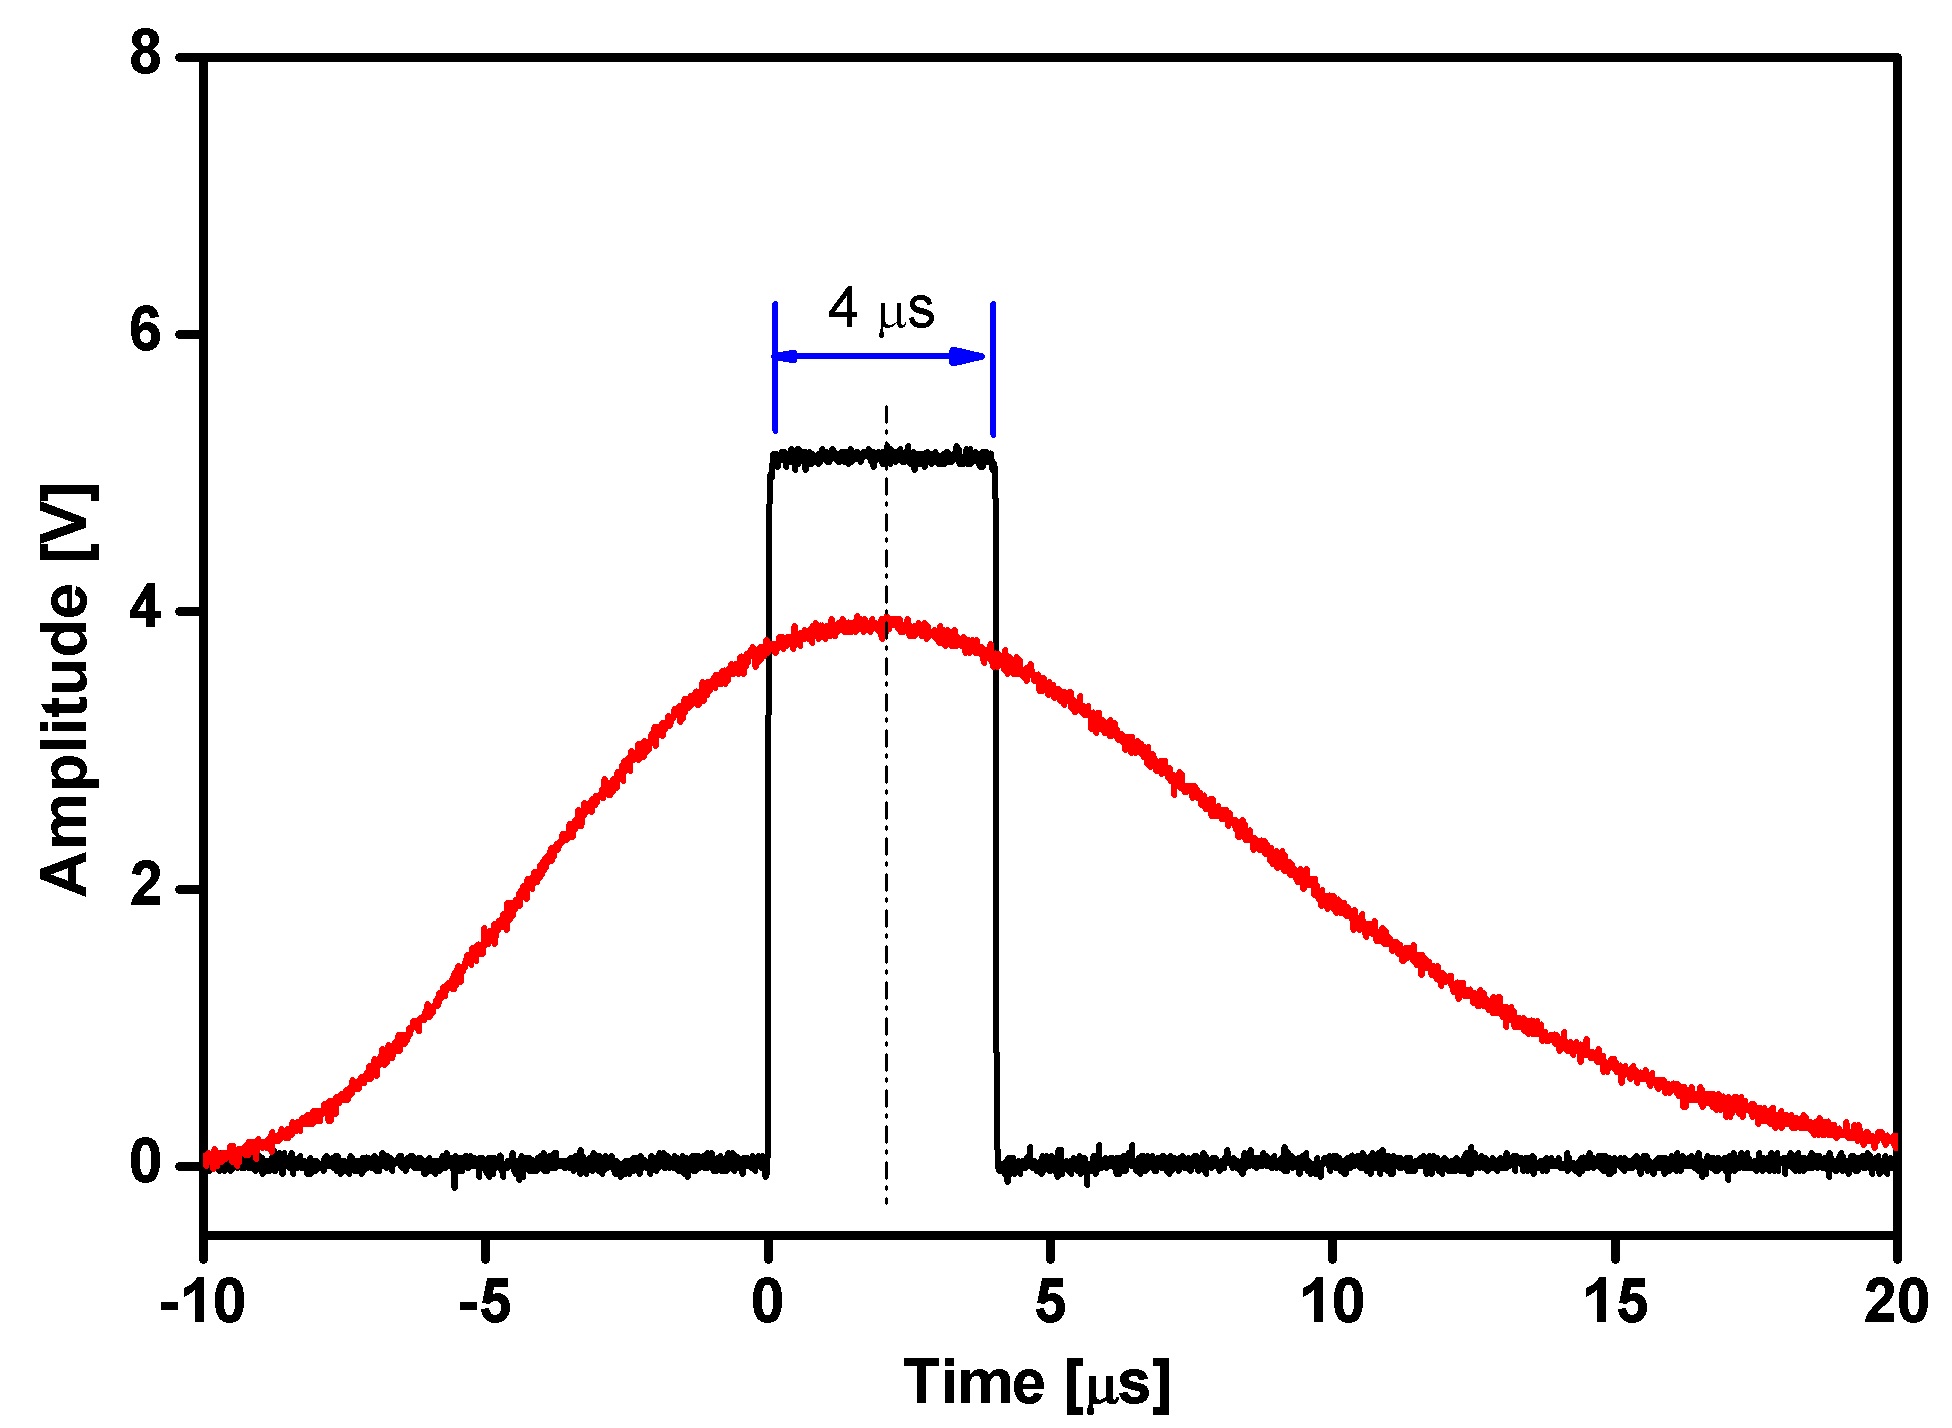 Figure 10. Timing of an energy signal from HPGe detector with a gate signal from TAC/SCA